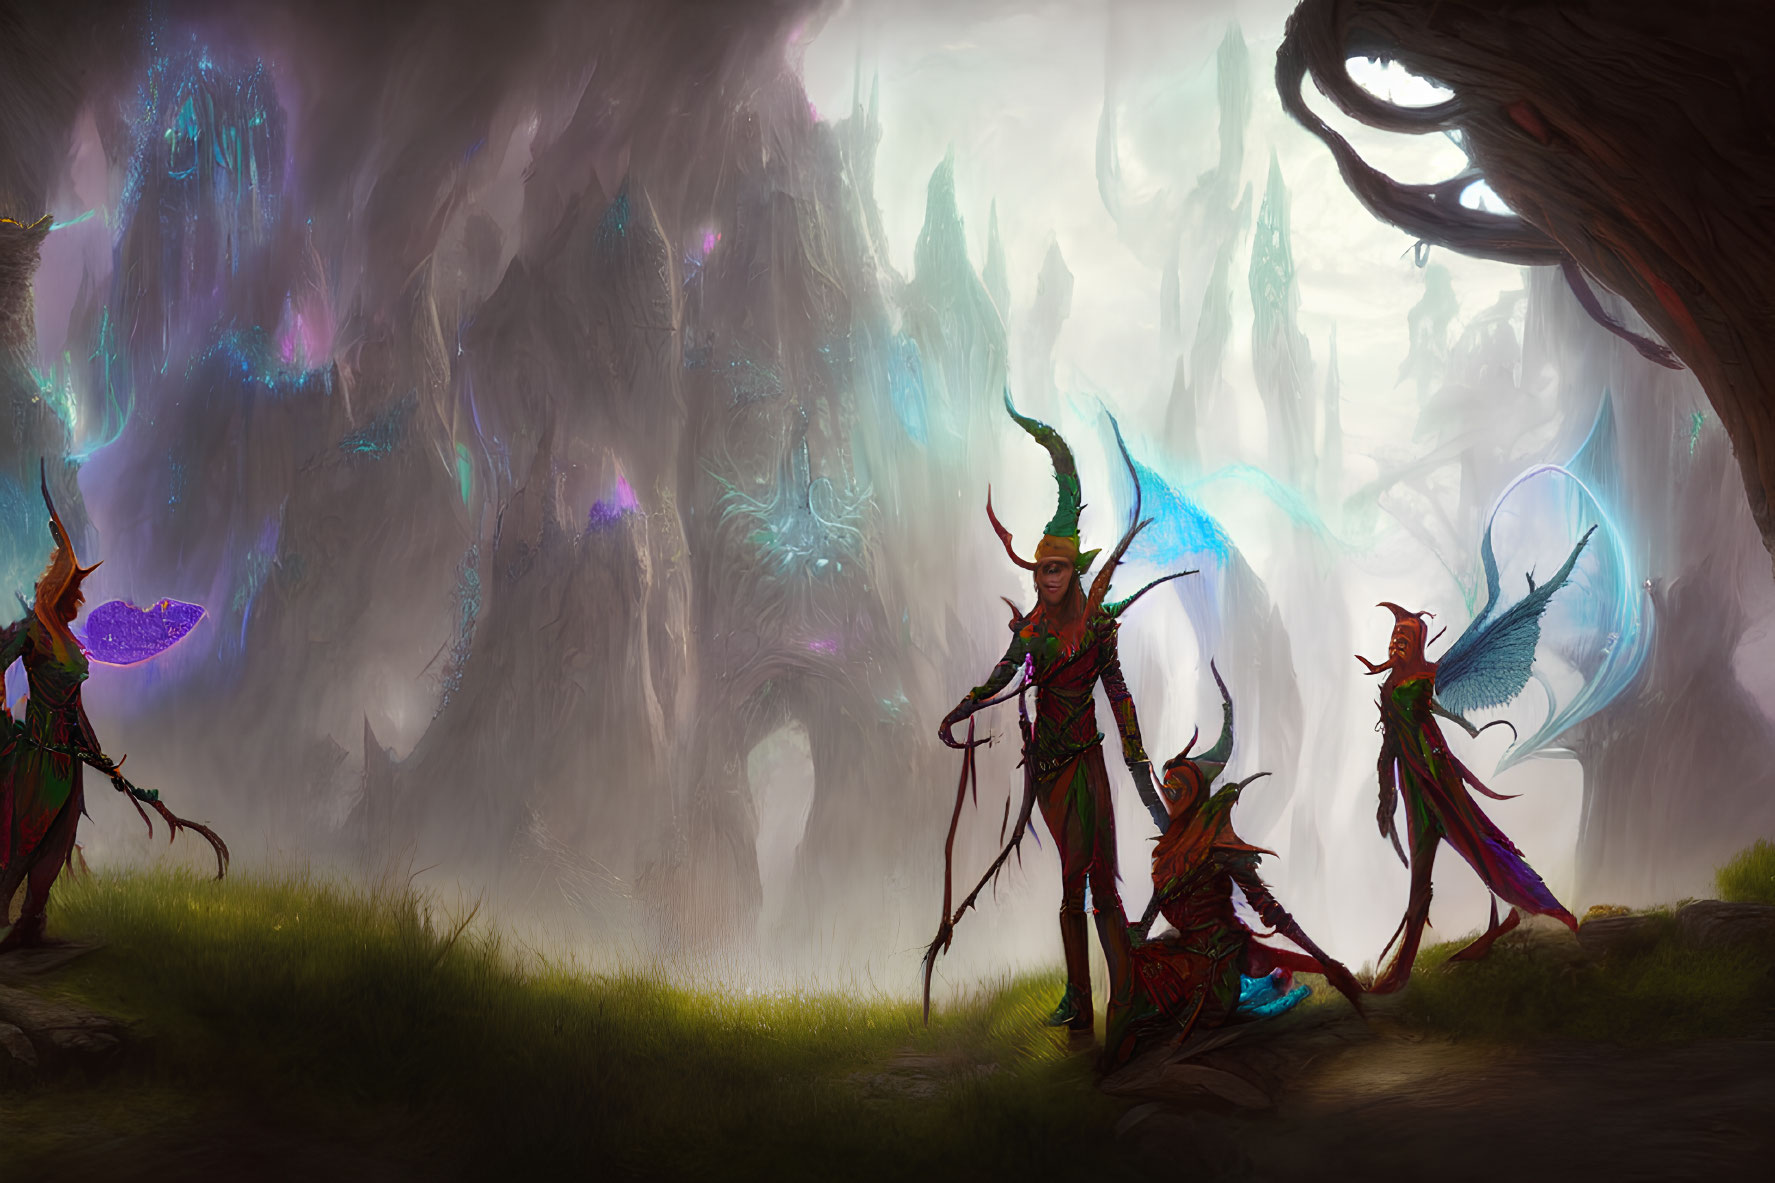 Ethereal butterflies and glowing elves in fantasy landscape